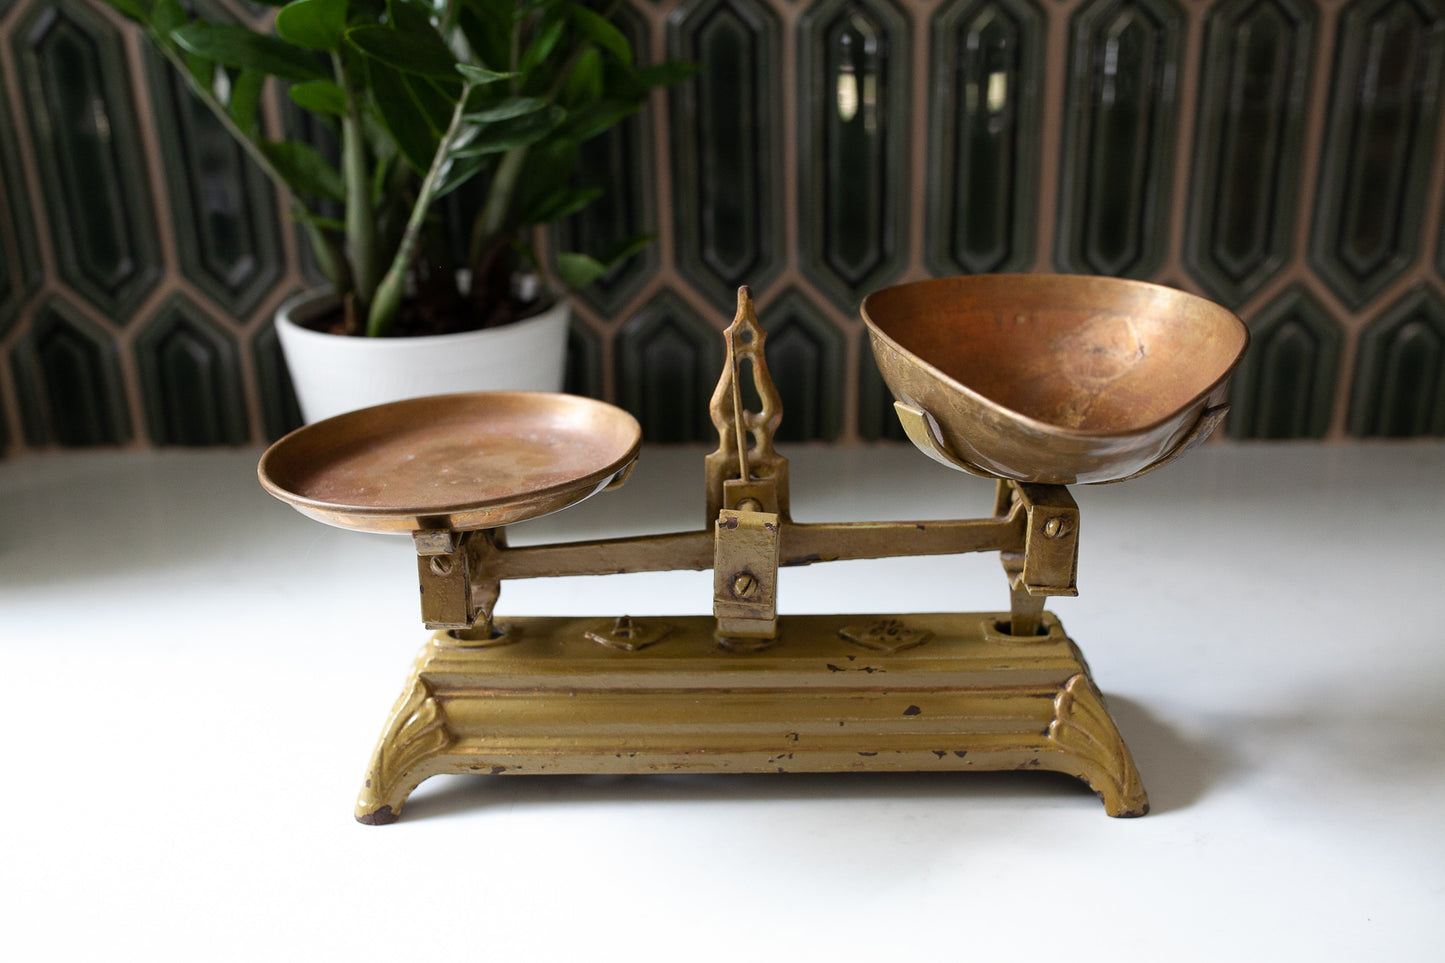 Antique Scale - Cast Iron Scale - Green and Copper Scale